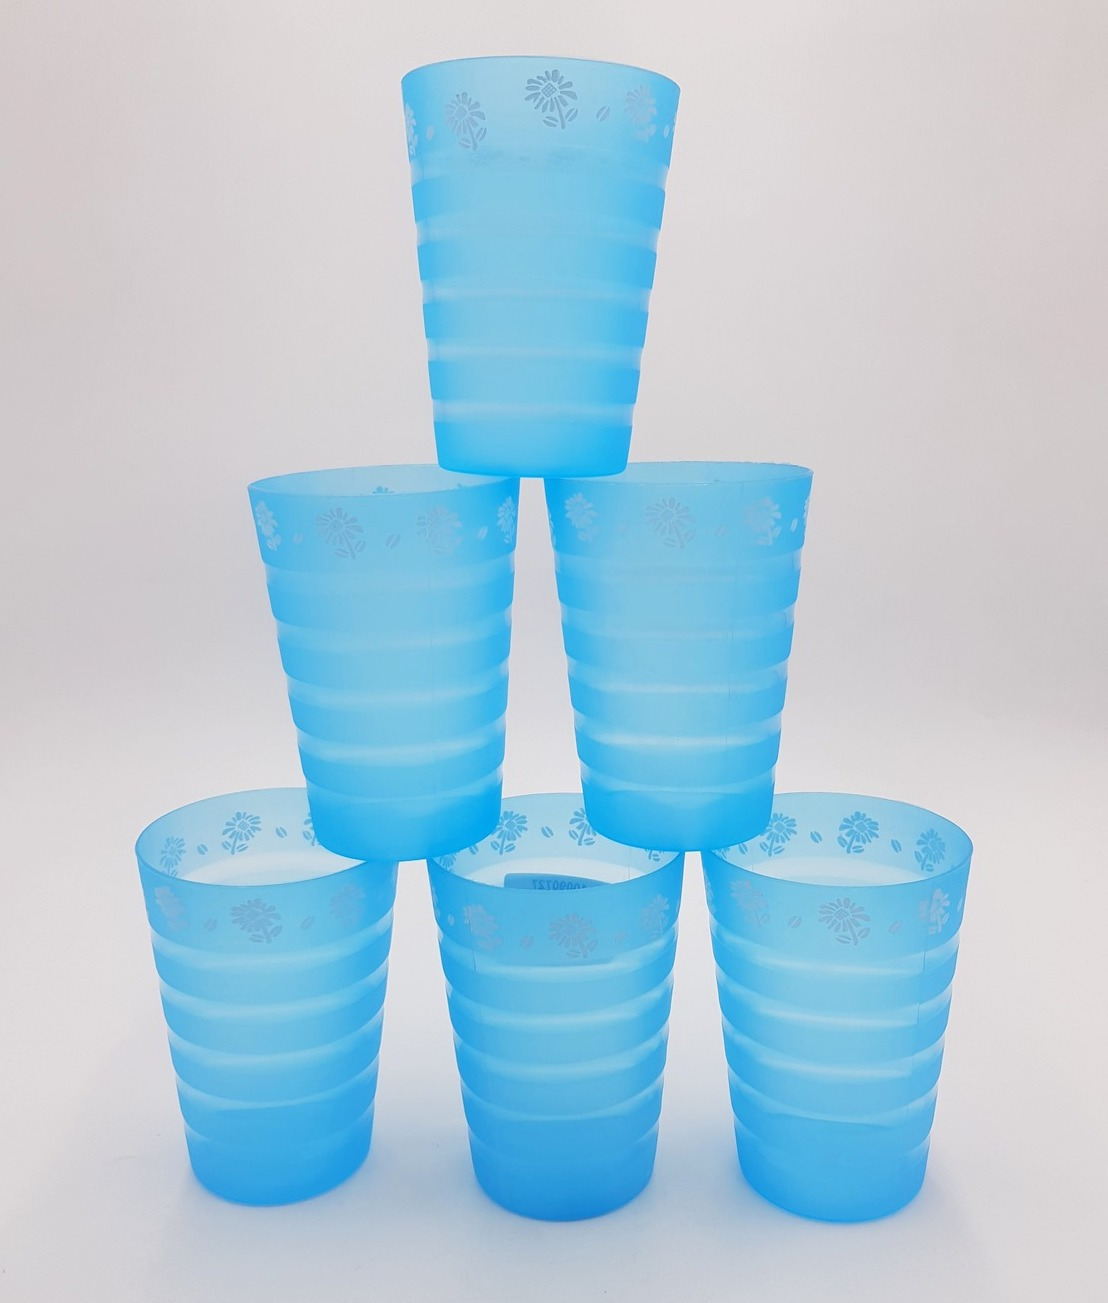 6 pcs 230ml Plastic Cups / Party Cups / Picnic Cups / Disposable Cups / Drinking Cups